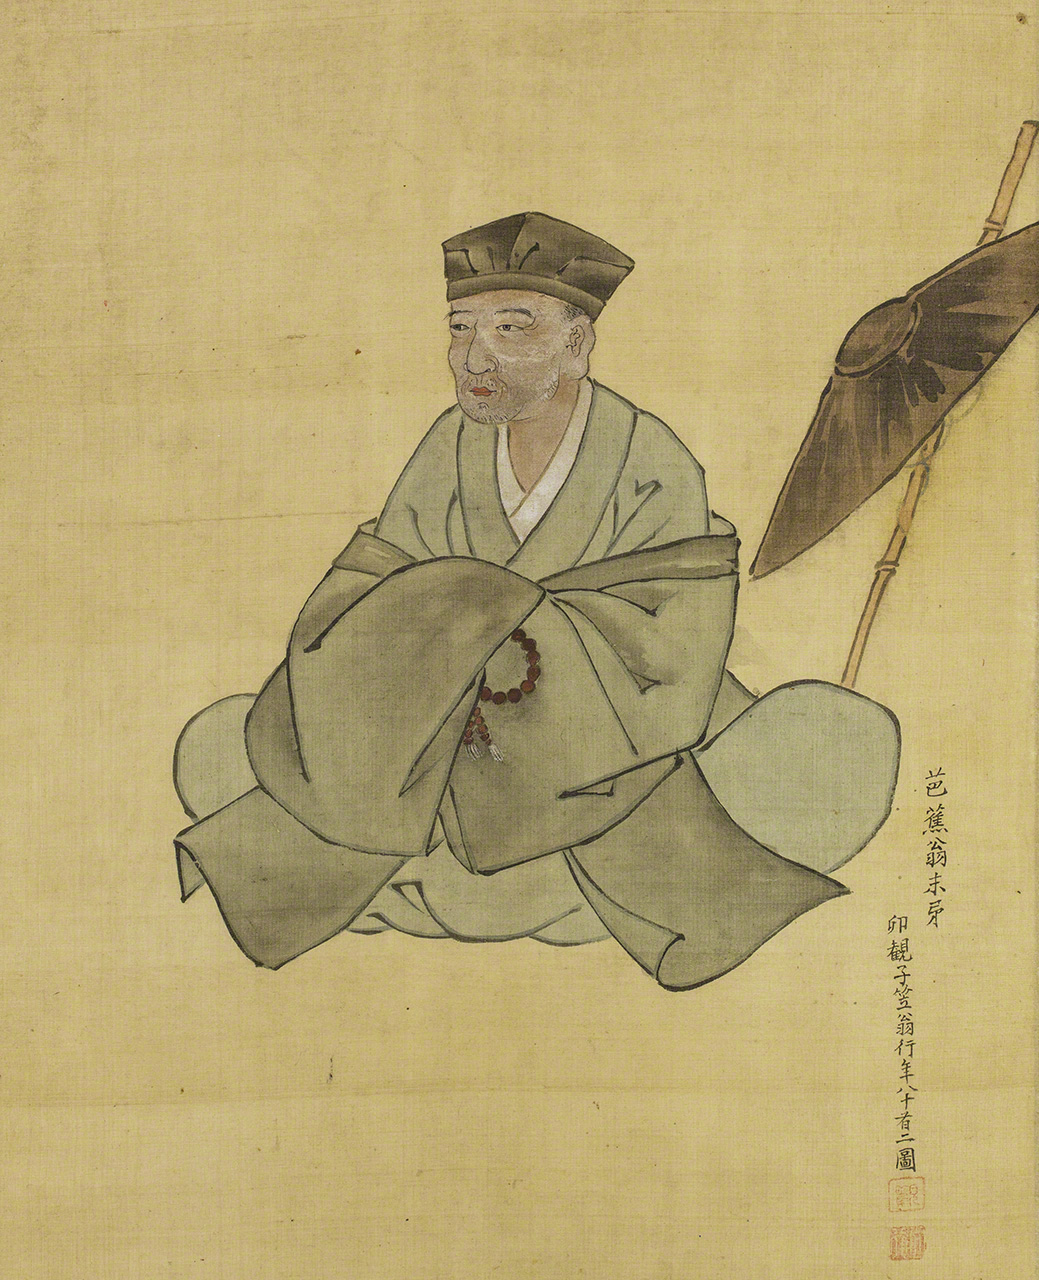 A portrait of Bashō by Ogawa Haritsu, an artist and lacquer craftsman as well as one of Bashō’s pupils. (Courtesy Bashō-ō Memorial Museum)